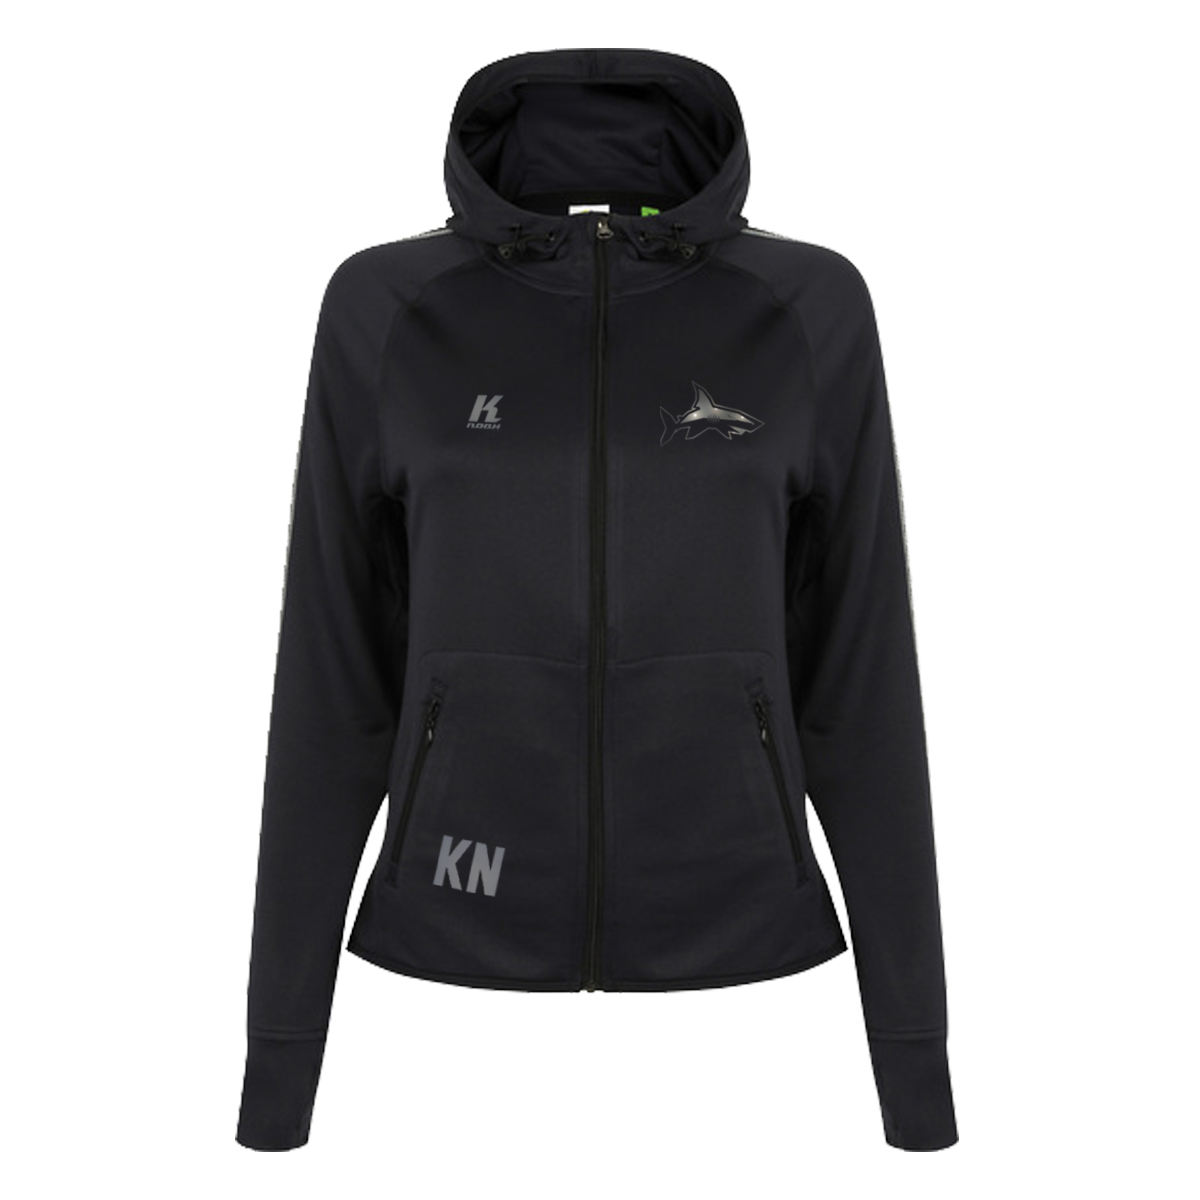 Sharks "Blackline" Womens Zip Hoodie TL551 with Initials/Playernumber